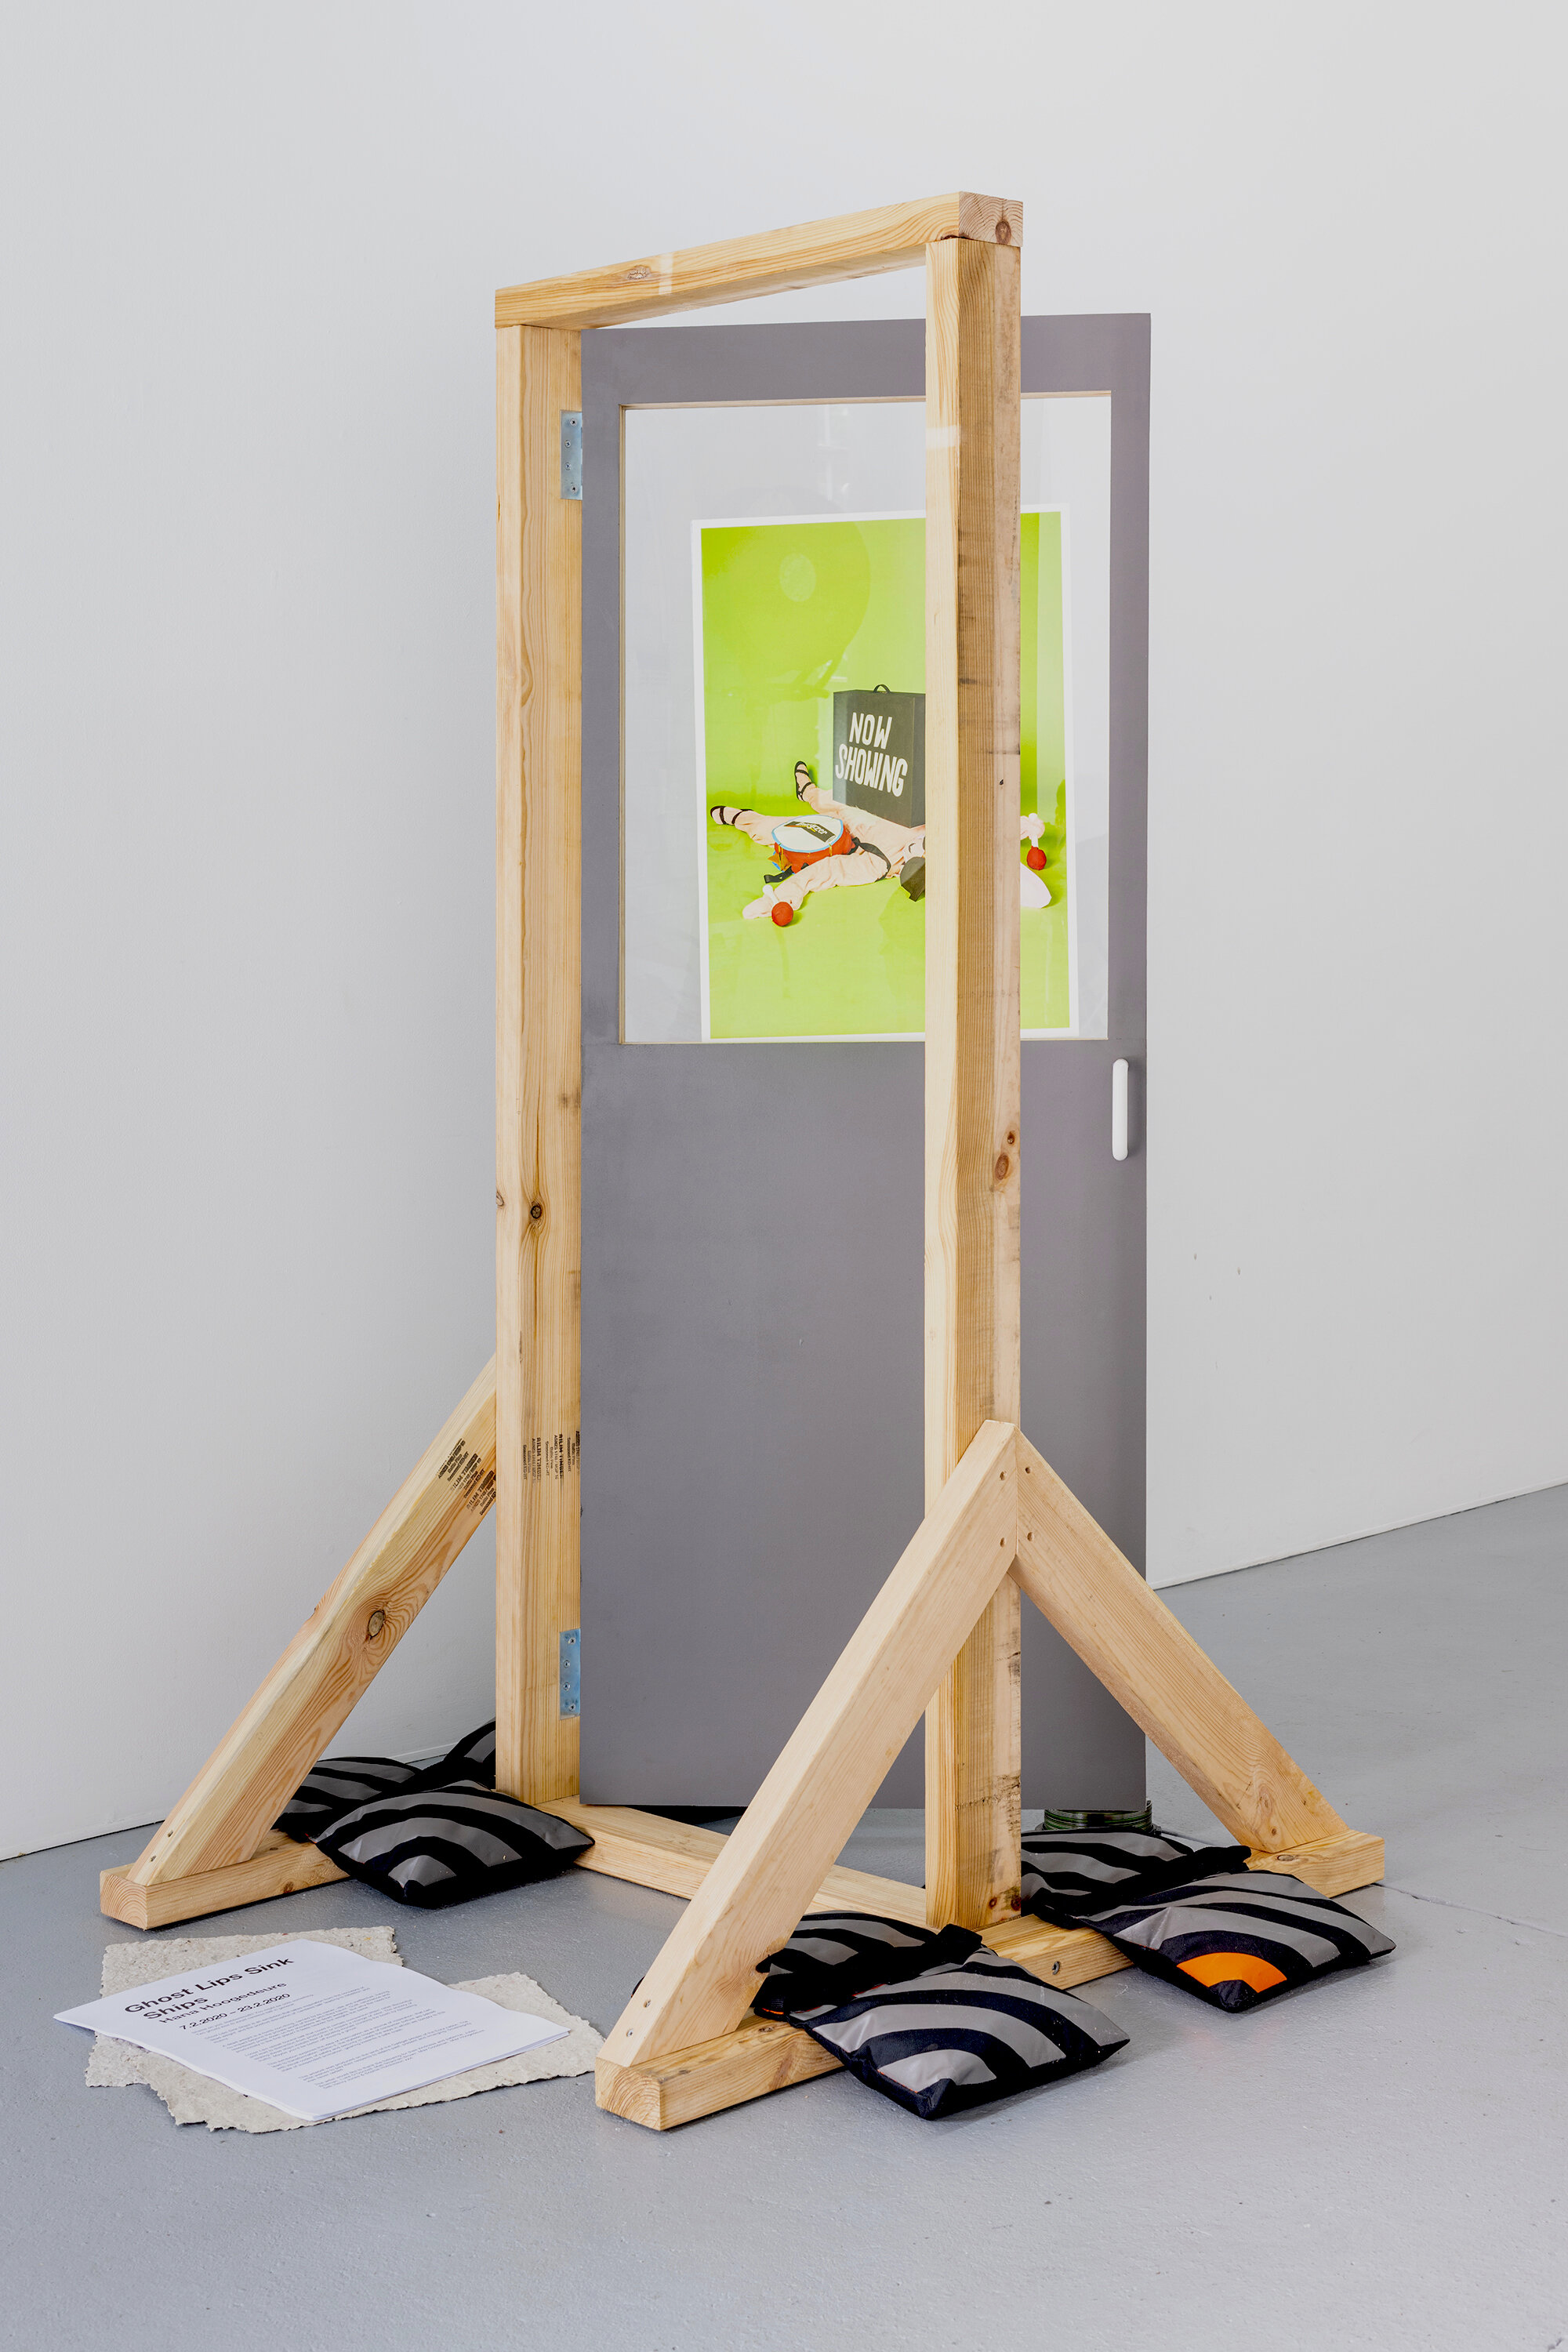  Structural Load, 2020   mdf, pine, perspex, sandbags, CDs    Theatre Black, 2019 (front)  inkjet print, photo by Max Goodman    Untitled (finished drawing #1), 2019 (back)  texta and pencil on paper    Photo: Kai Wasikowski 